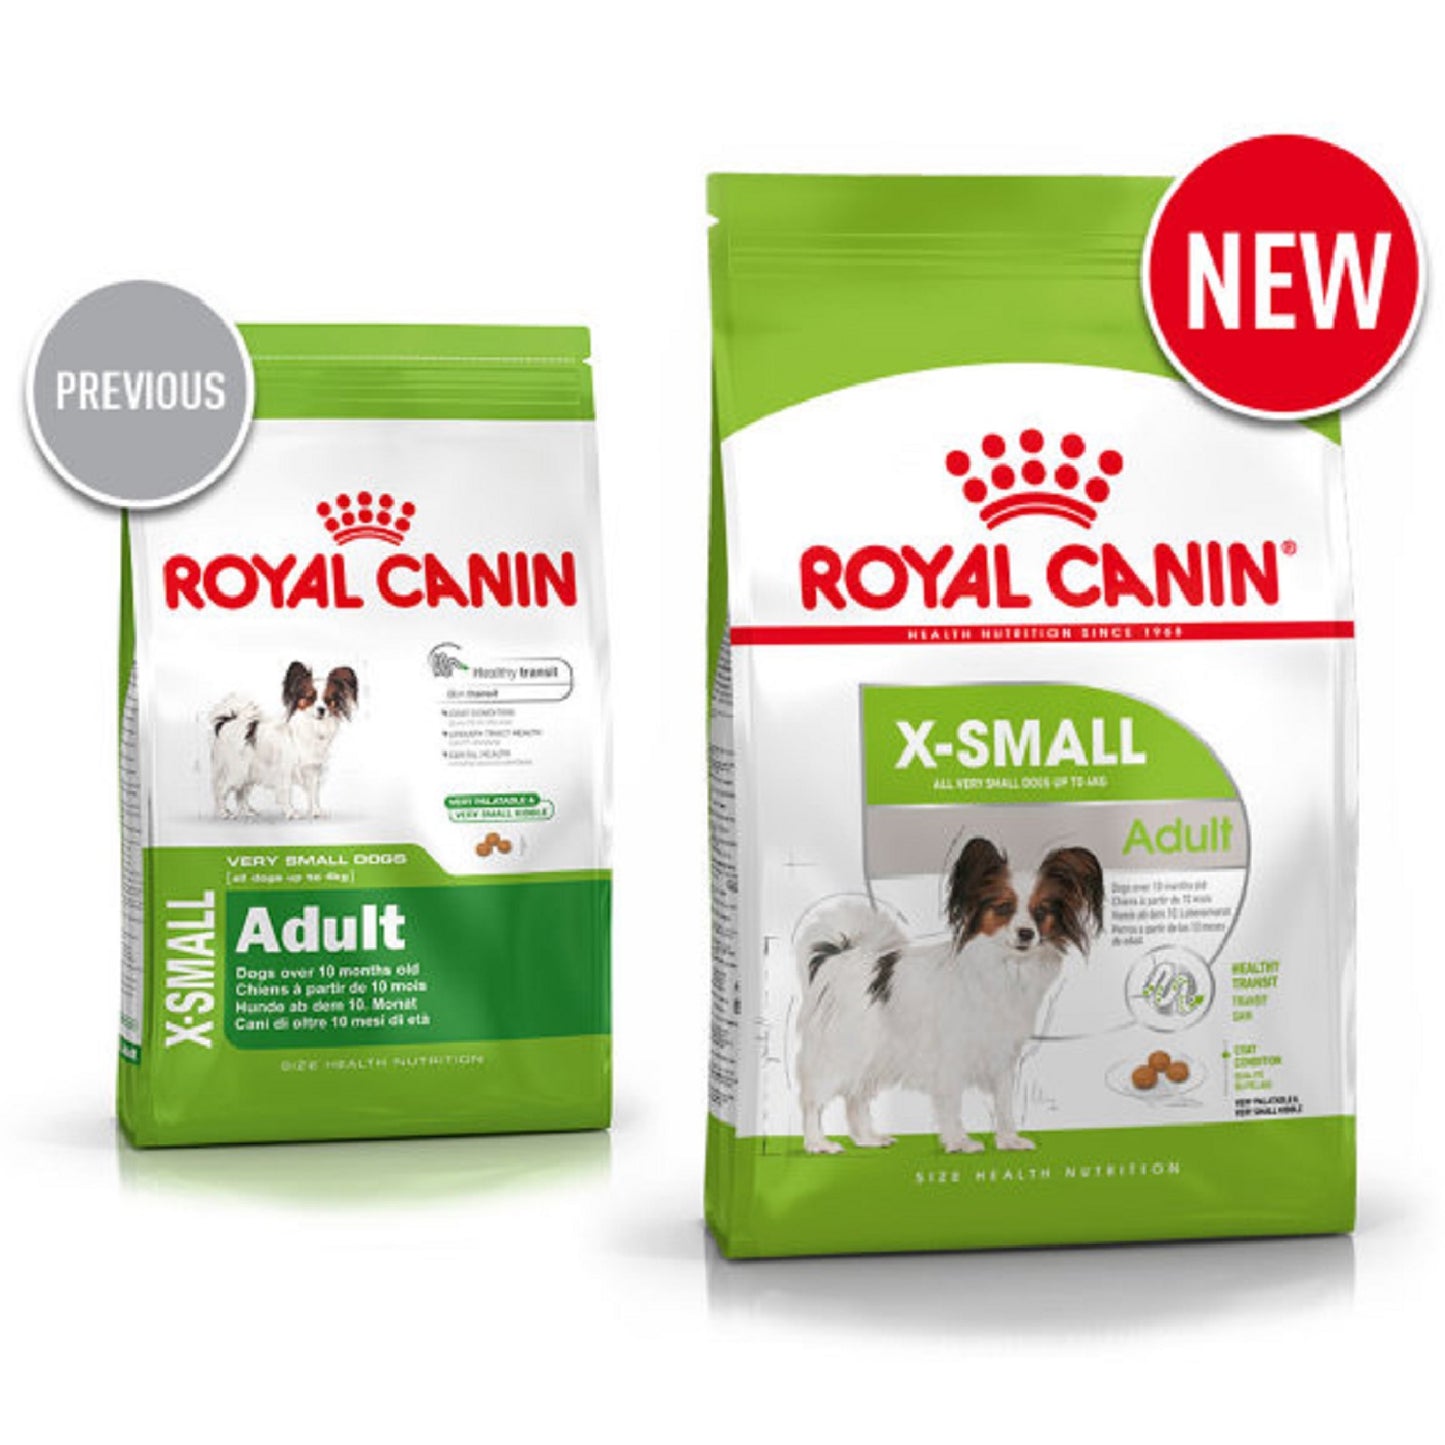 ROYAL CANIN - X-Small Adult (1.5kg)